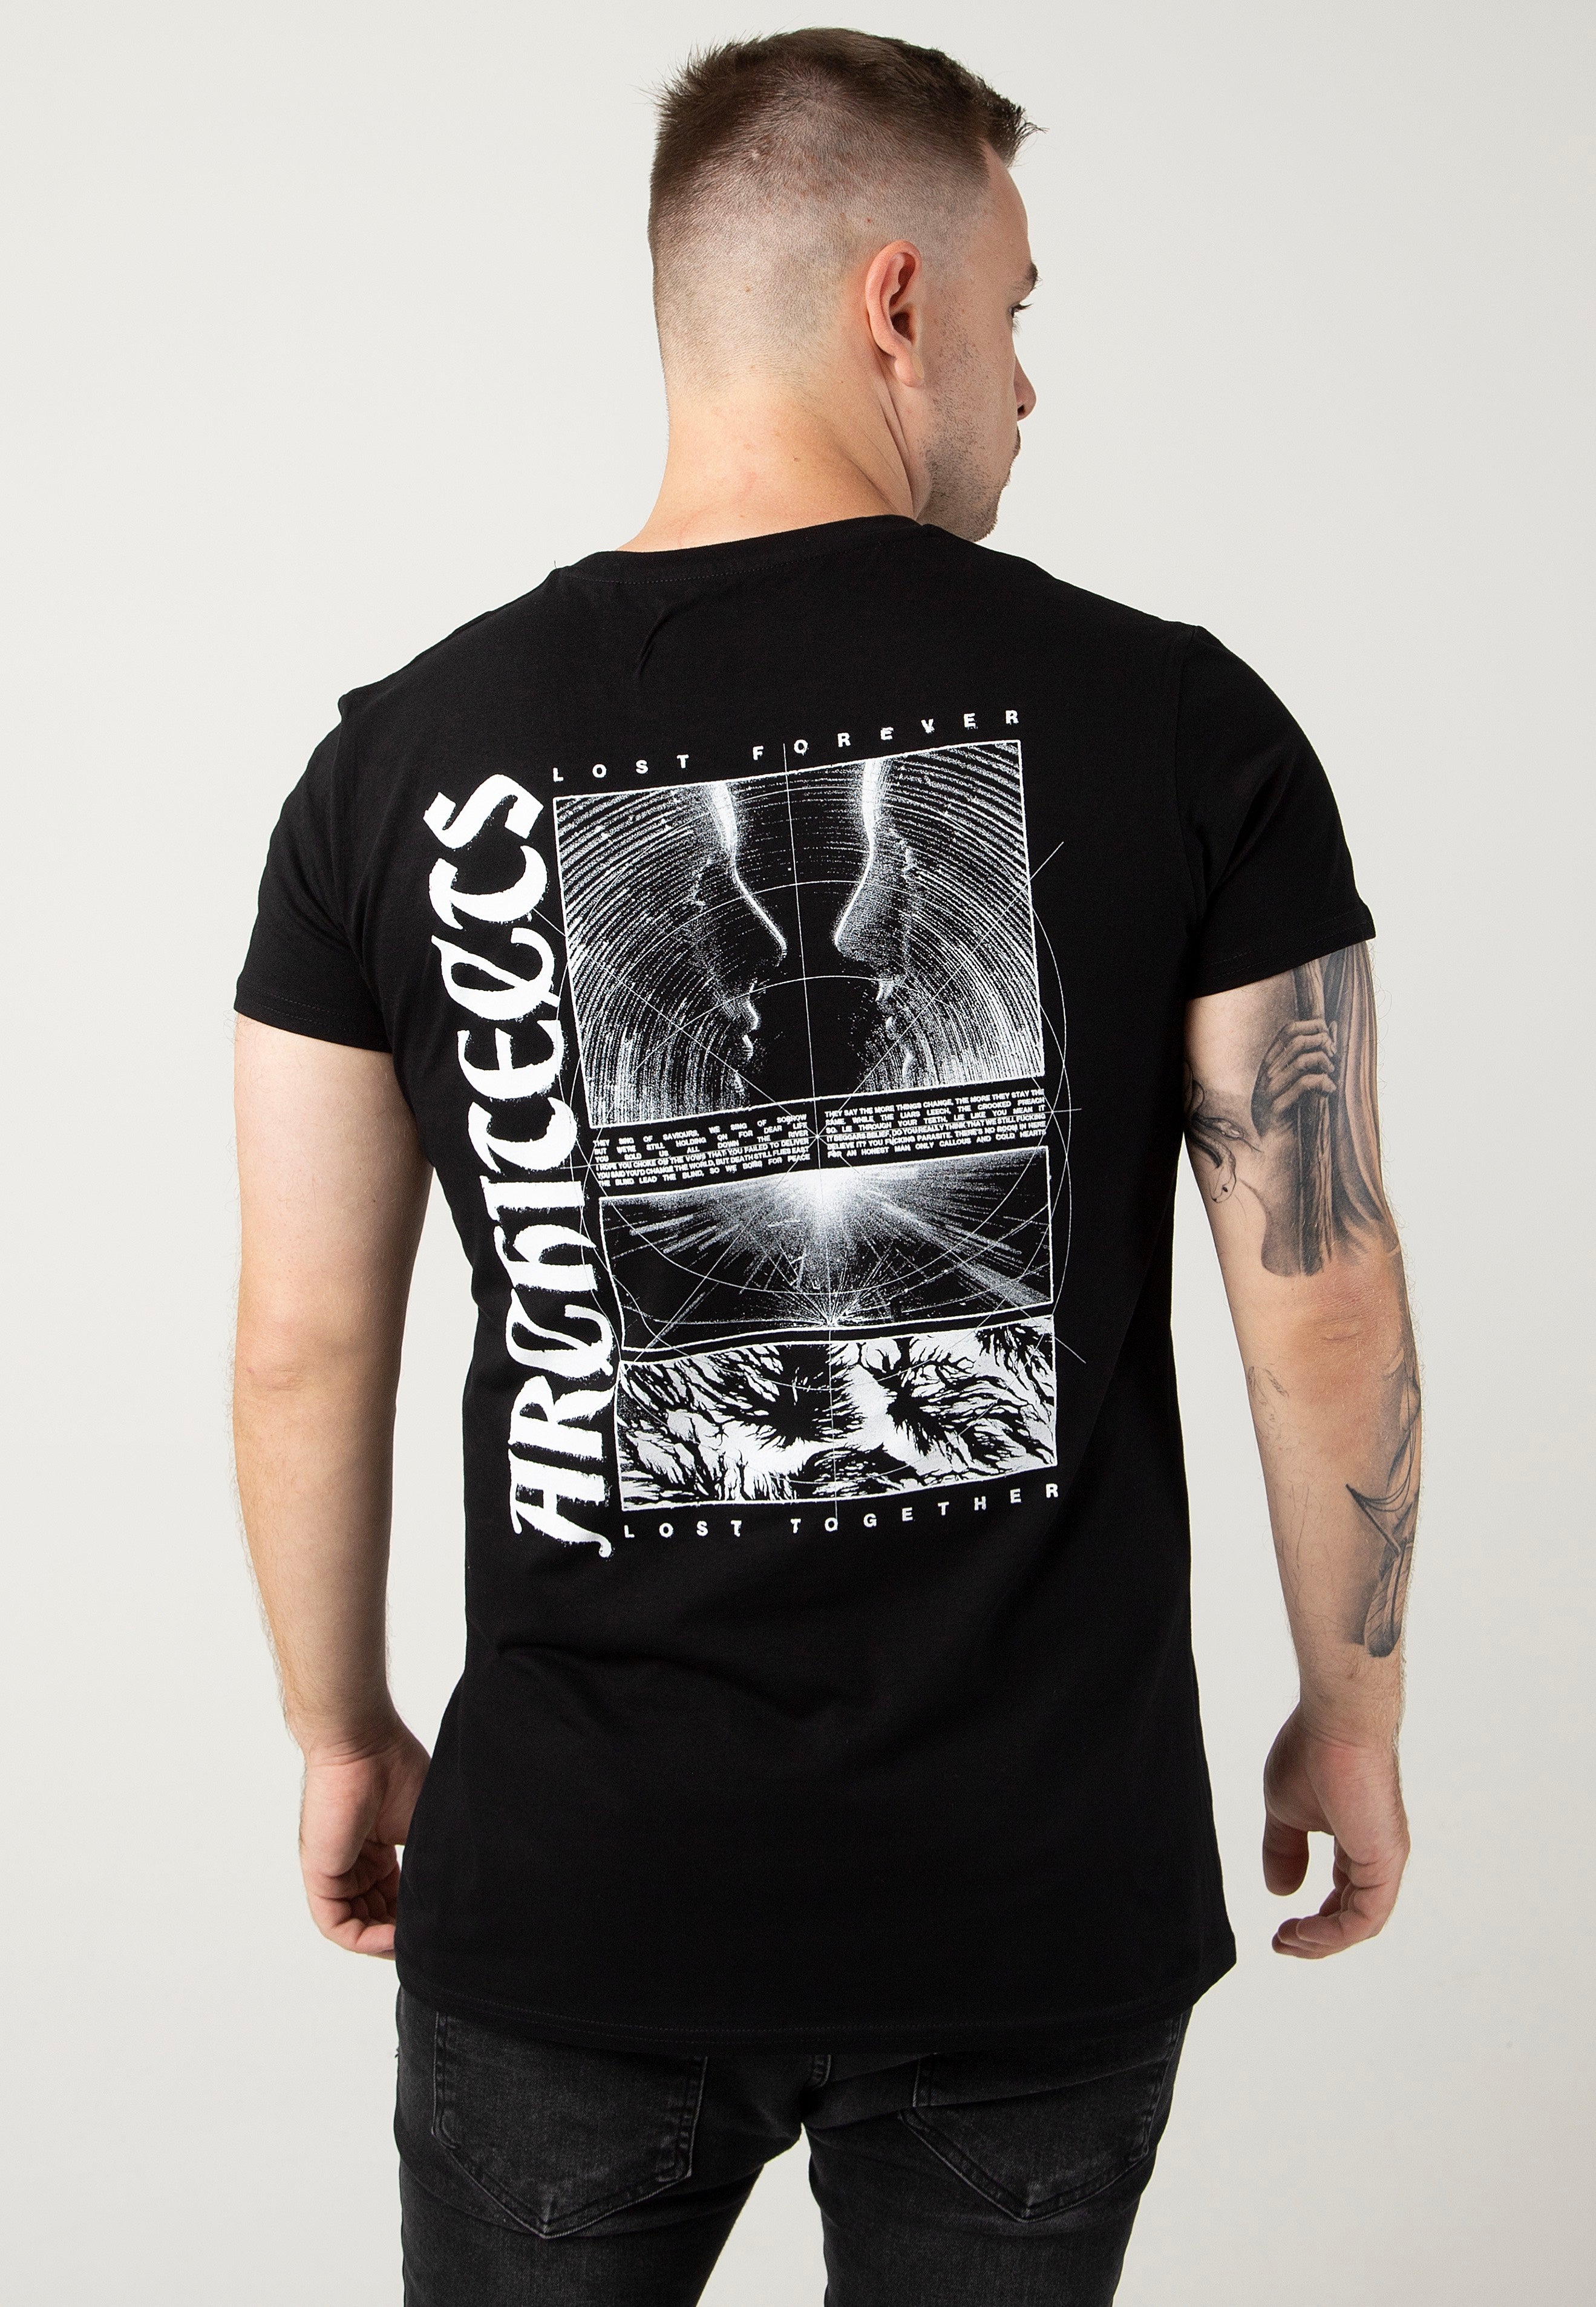 Architects - Lost Forever Stare - T-Shirt | Men-Image